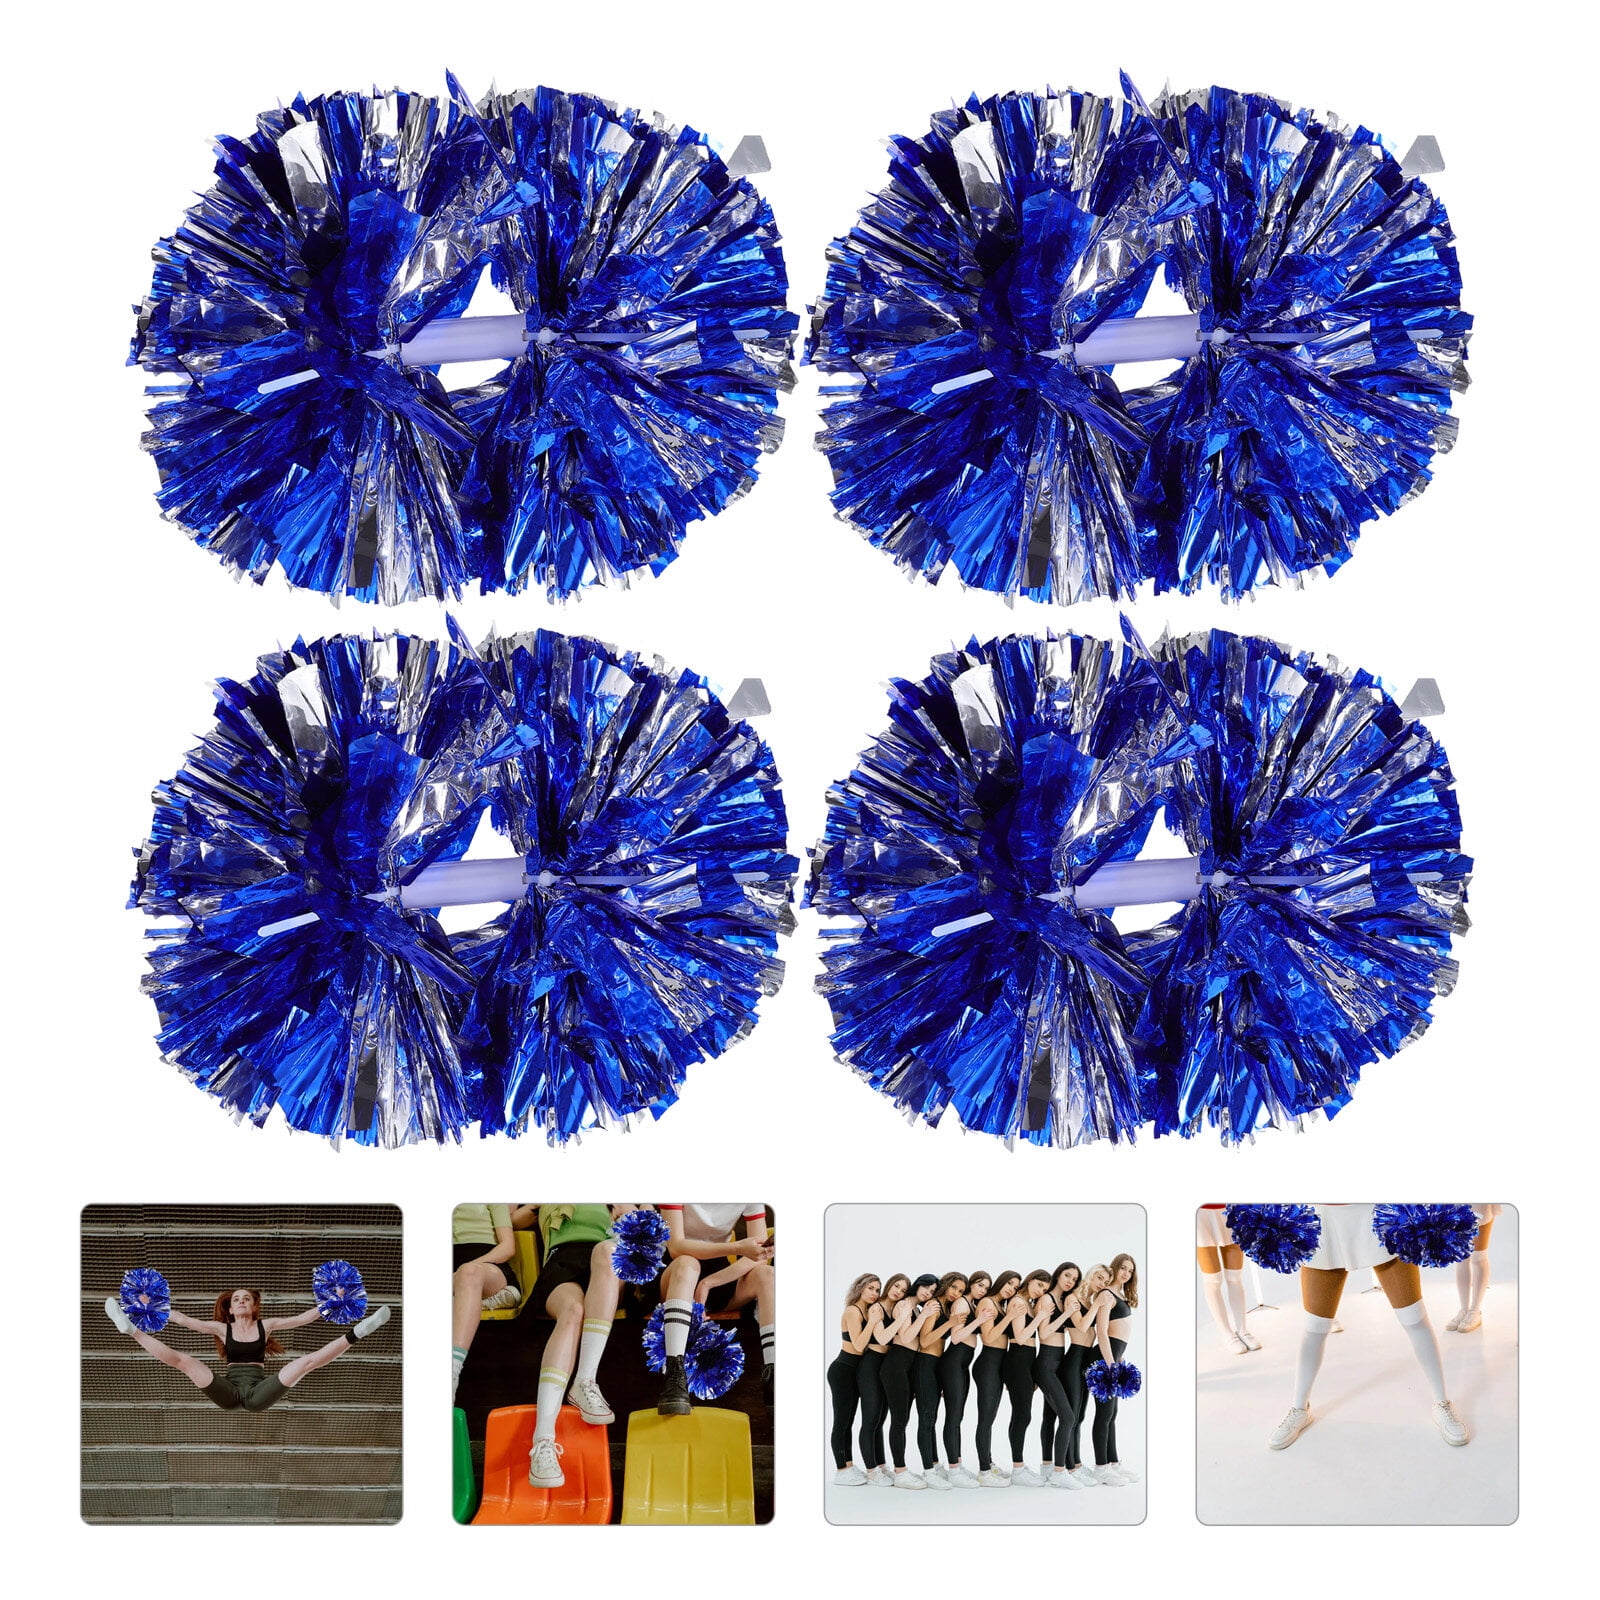 2pcs Blue Pet Pom Poms Cheerleader Party Sports Rally Props For Football  And Basketball